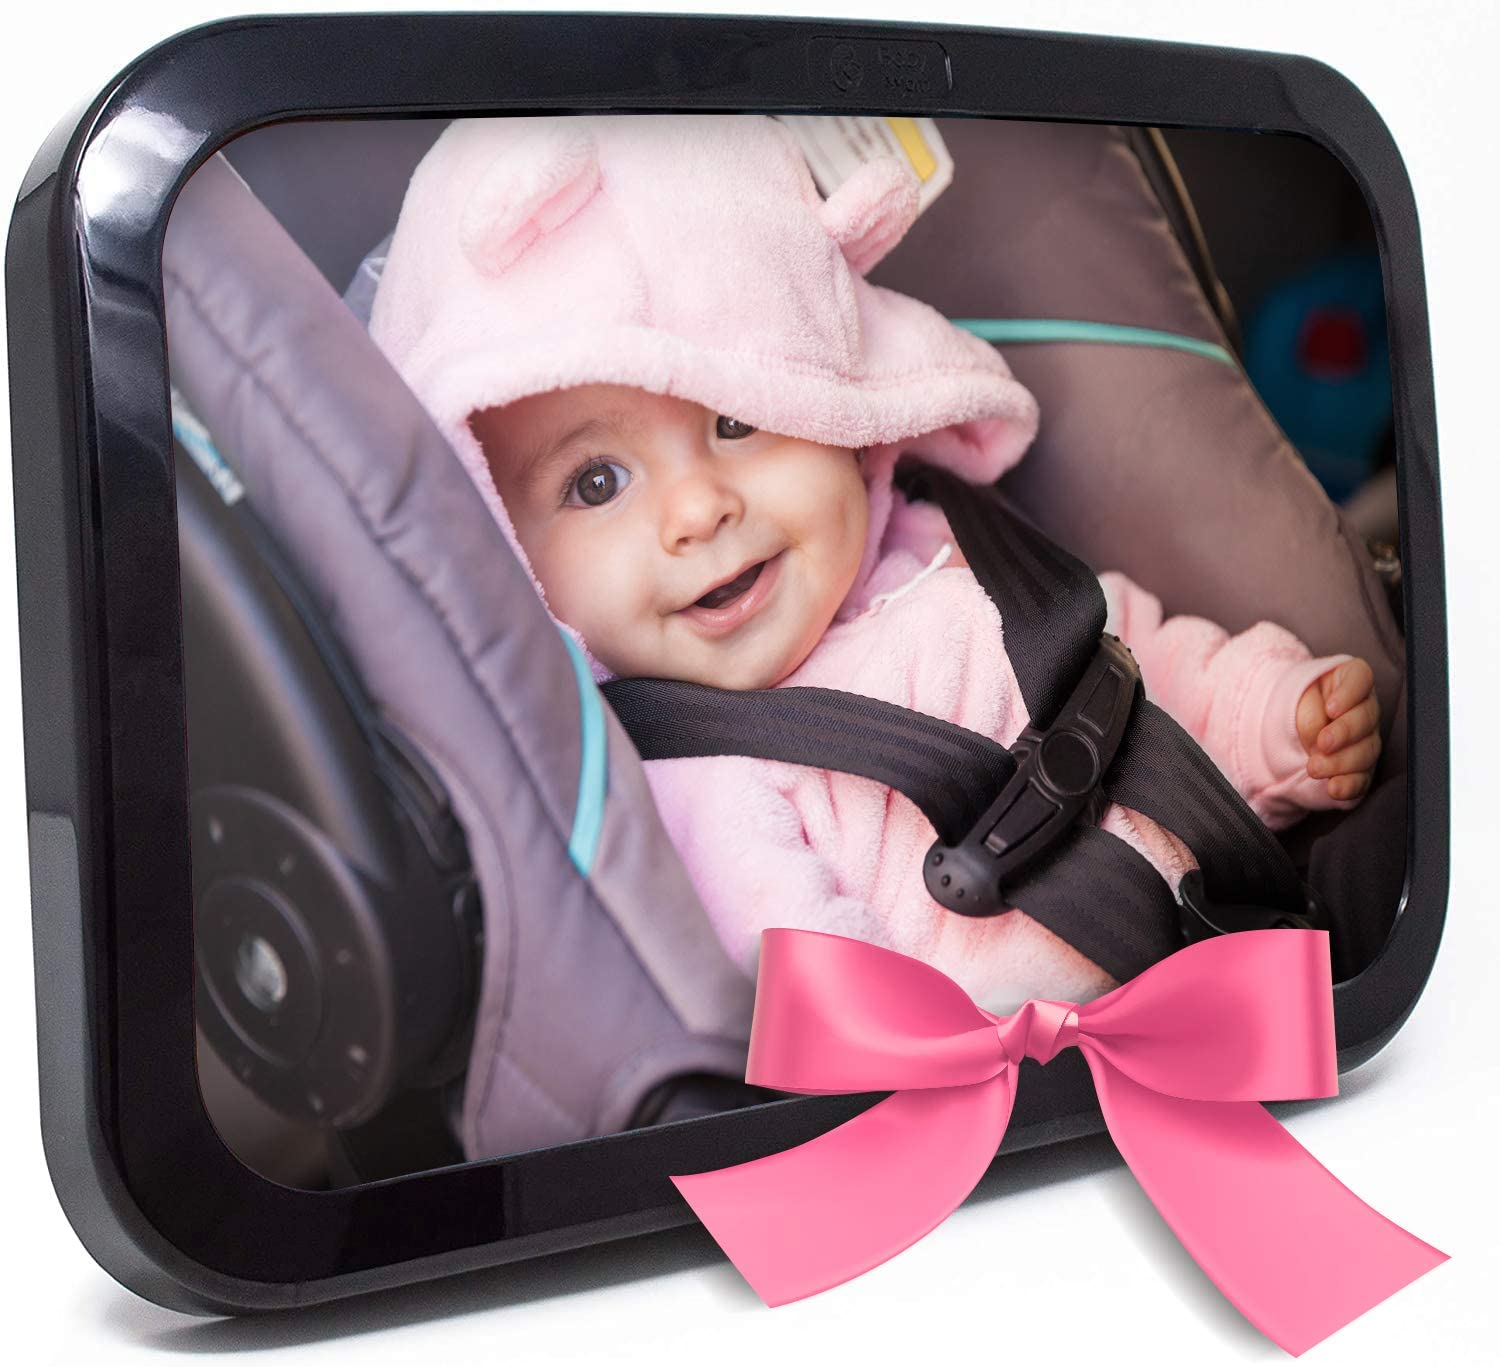 Baby & Mom Rear View Baby Car Seat Mirror - Wide Convex Shatterproof Glass - Fully Assembled - Car Mirriors Baby - car sear mirror - baby girl mirror car - back mirror baby car seat Black - image 1 of 9